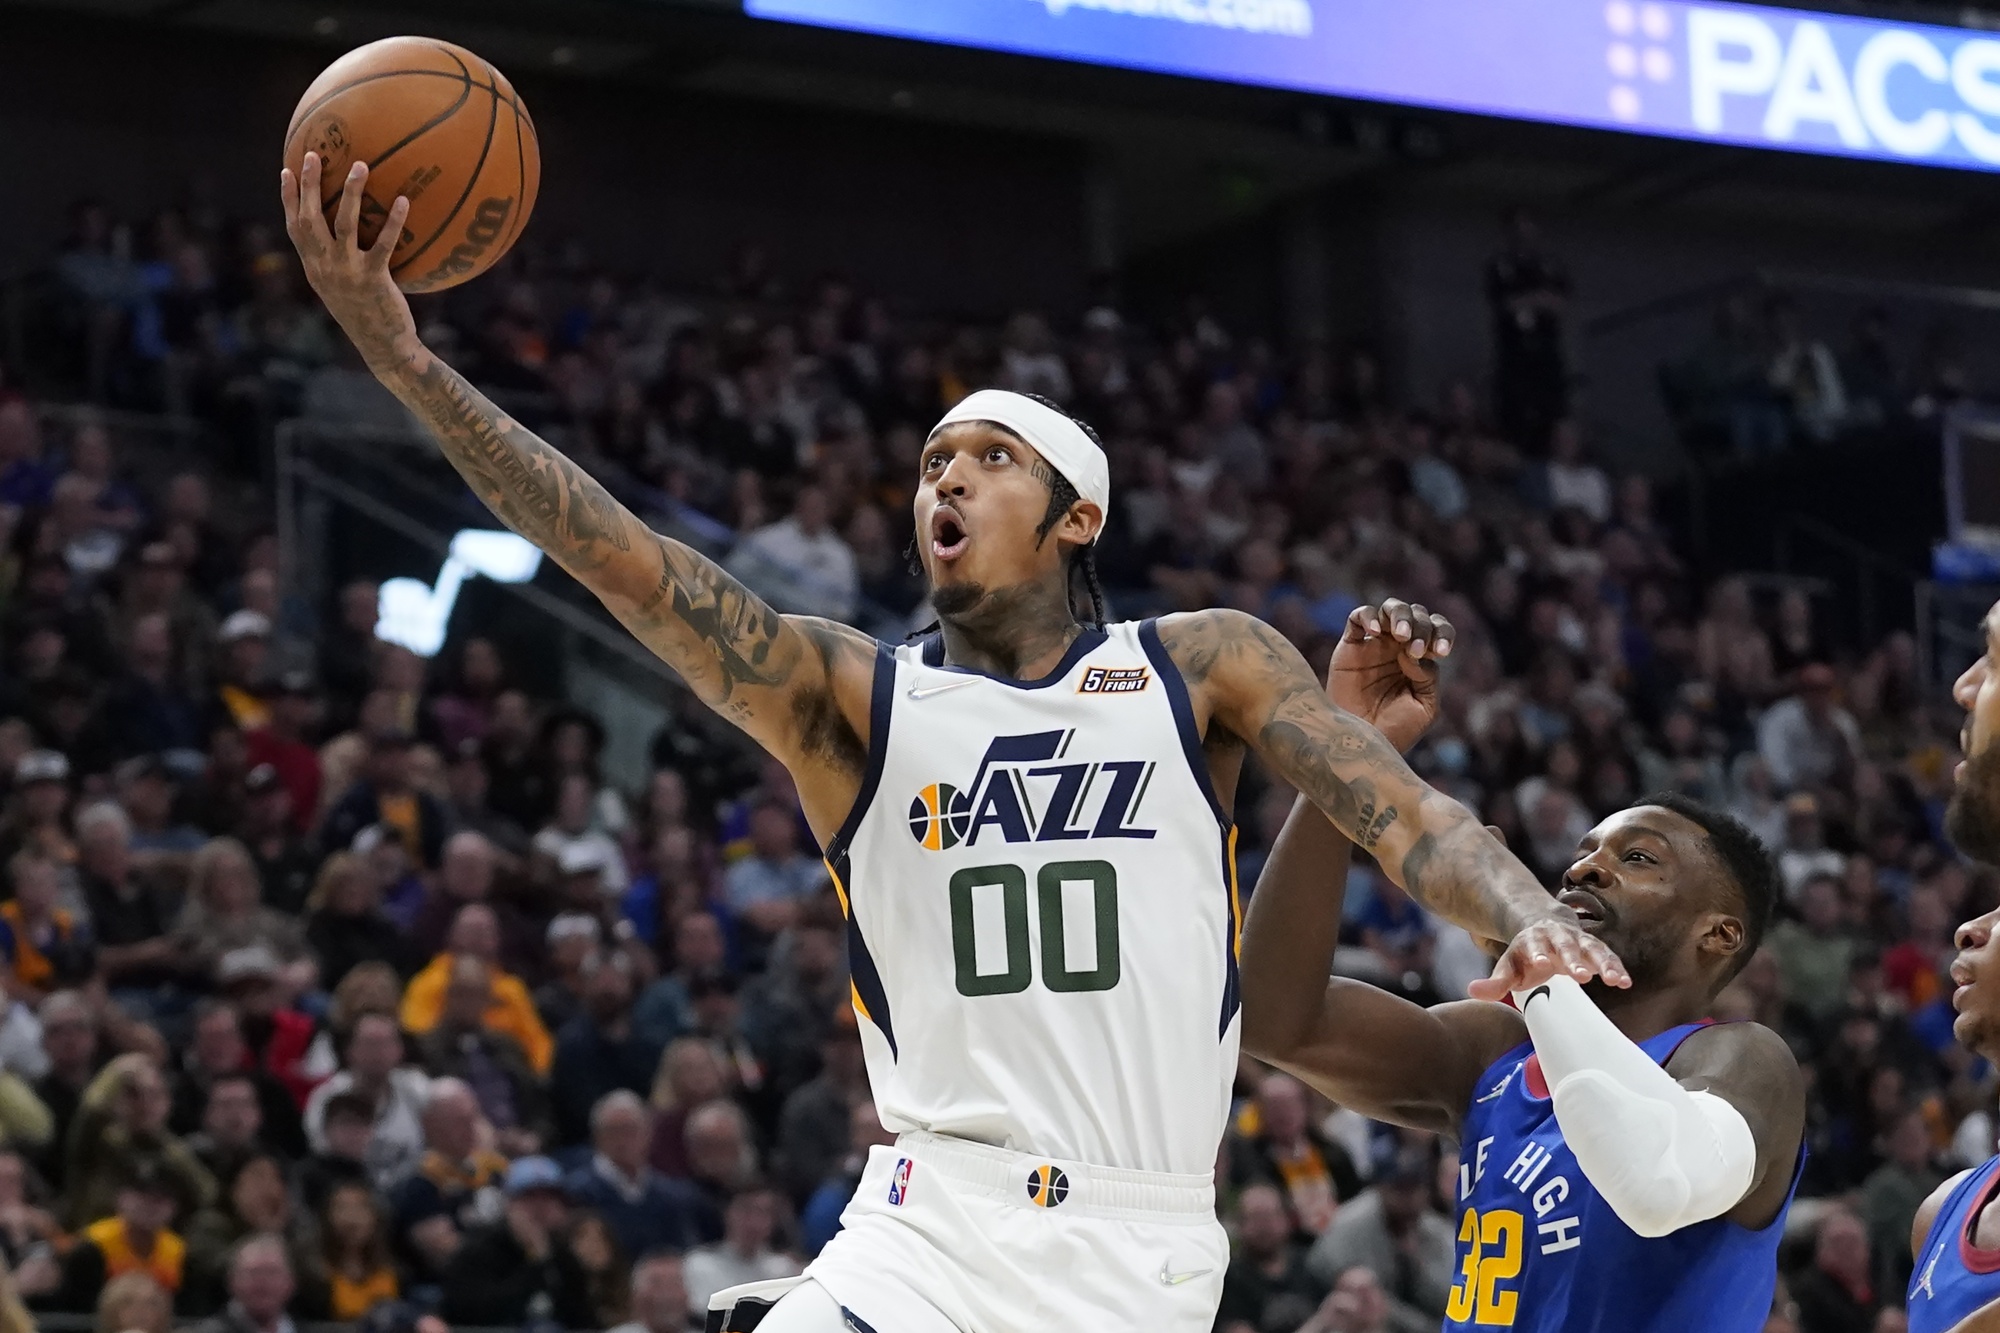 Utah's SVP of Marketing chats about the Jazz's latest look